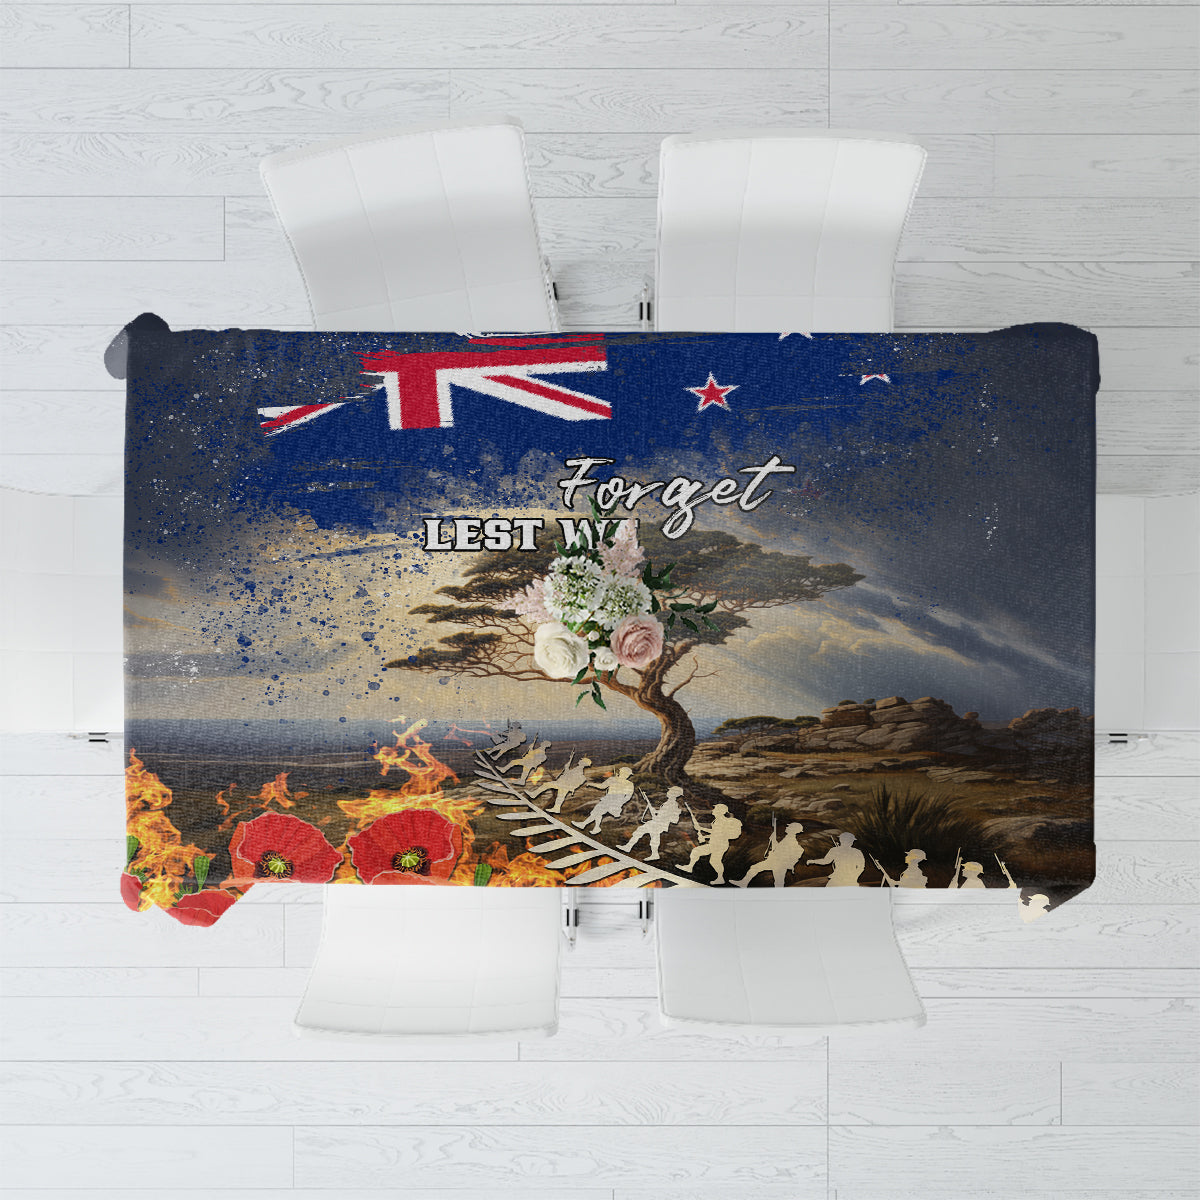 New Zealand ANZAC Day Tablecloth The Lonesome Pine With Soldier Fern LT05 Blue - Polynesian Pride